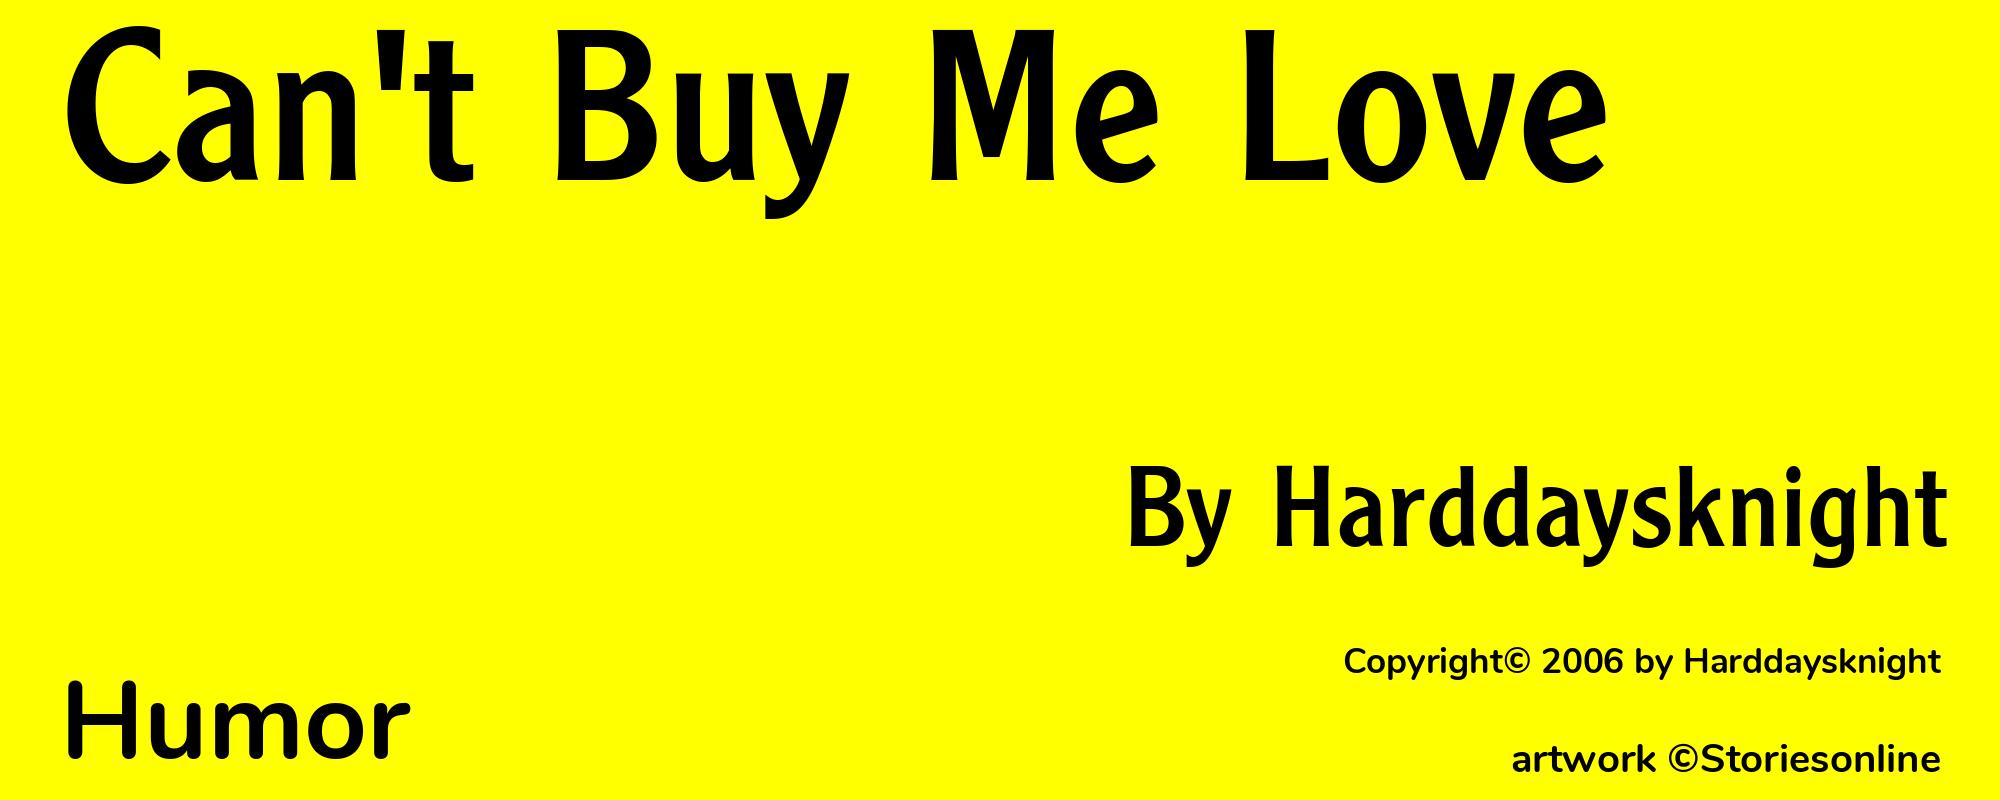 Can't Buy Me Love - Cover